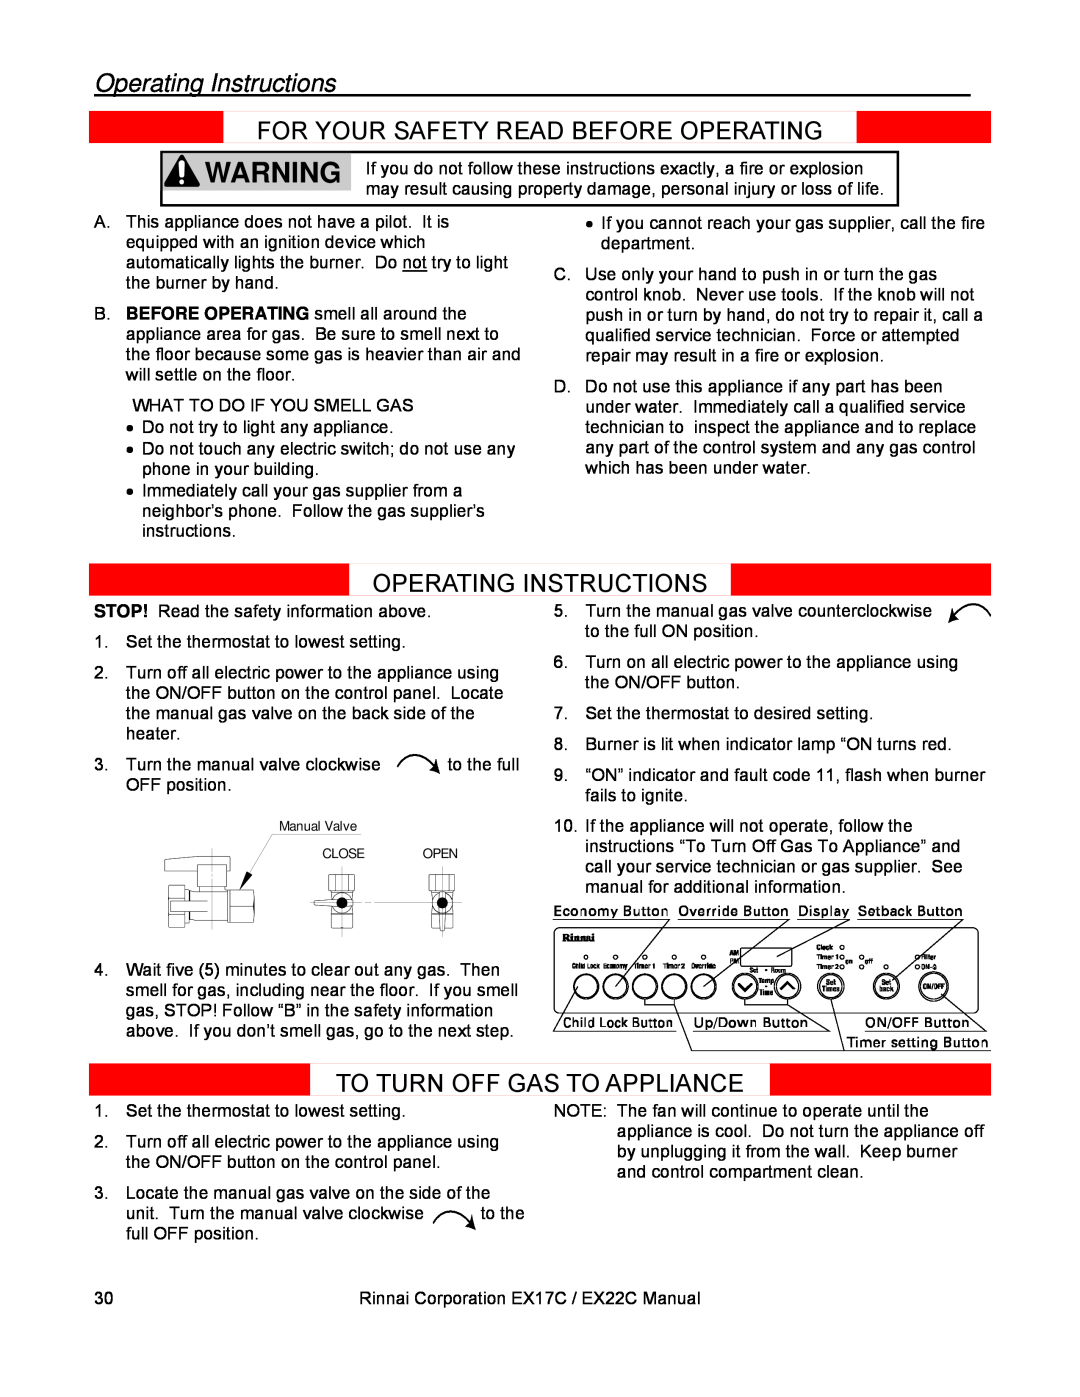 Rinnai EX22C (RHFE-559FTA) Operating Instructions, For Your Safety Read Before Operating, To Turn Off Gas To Appliance 